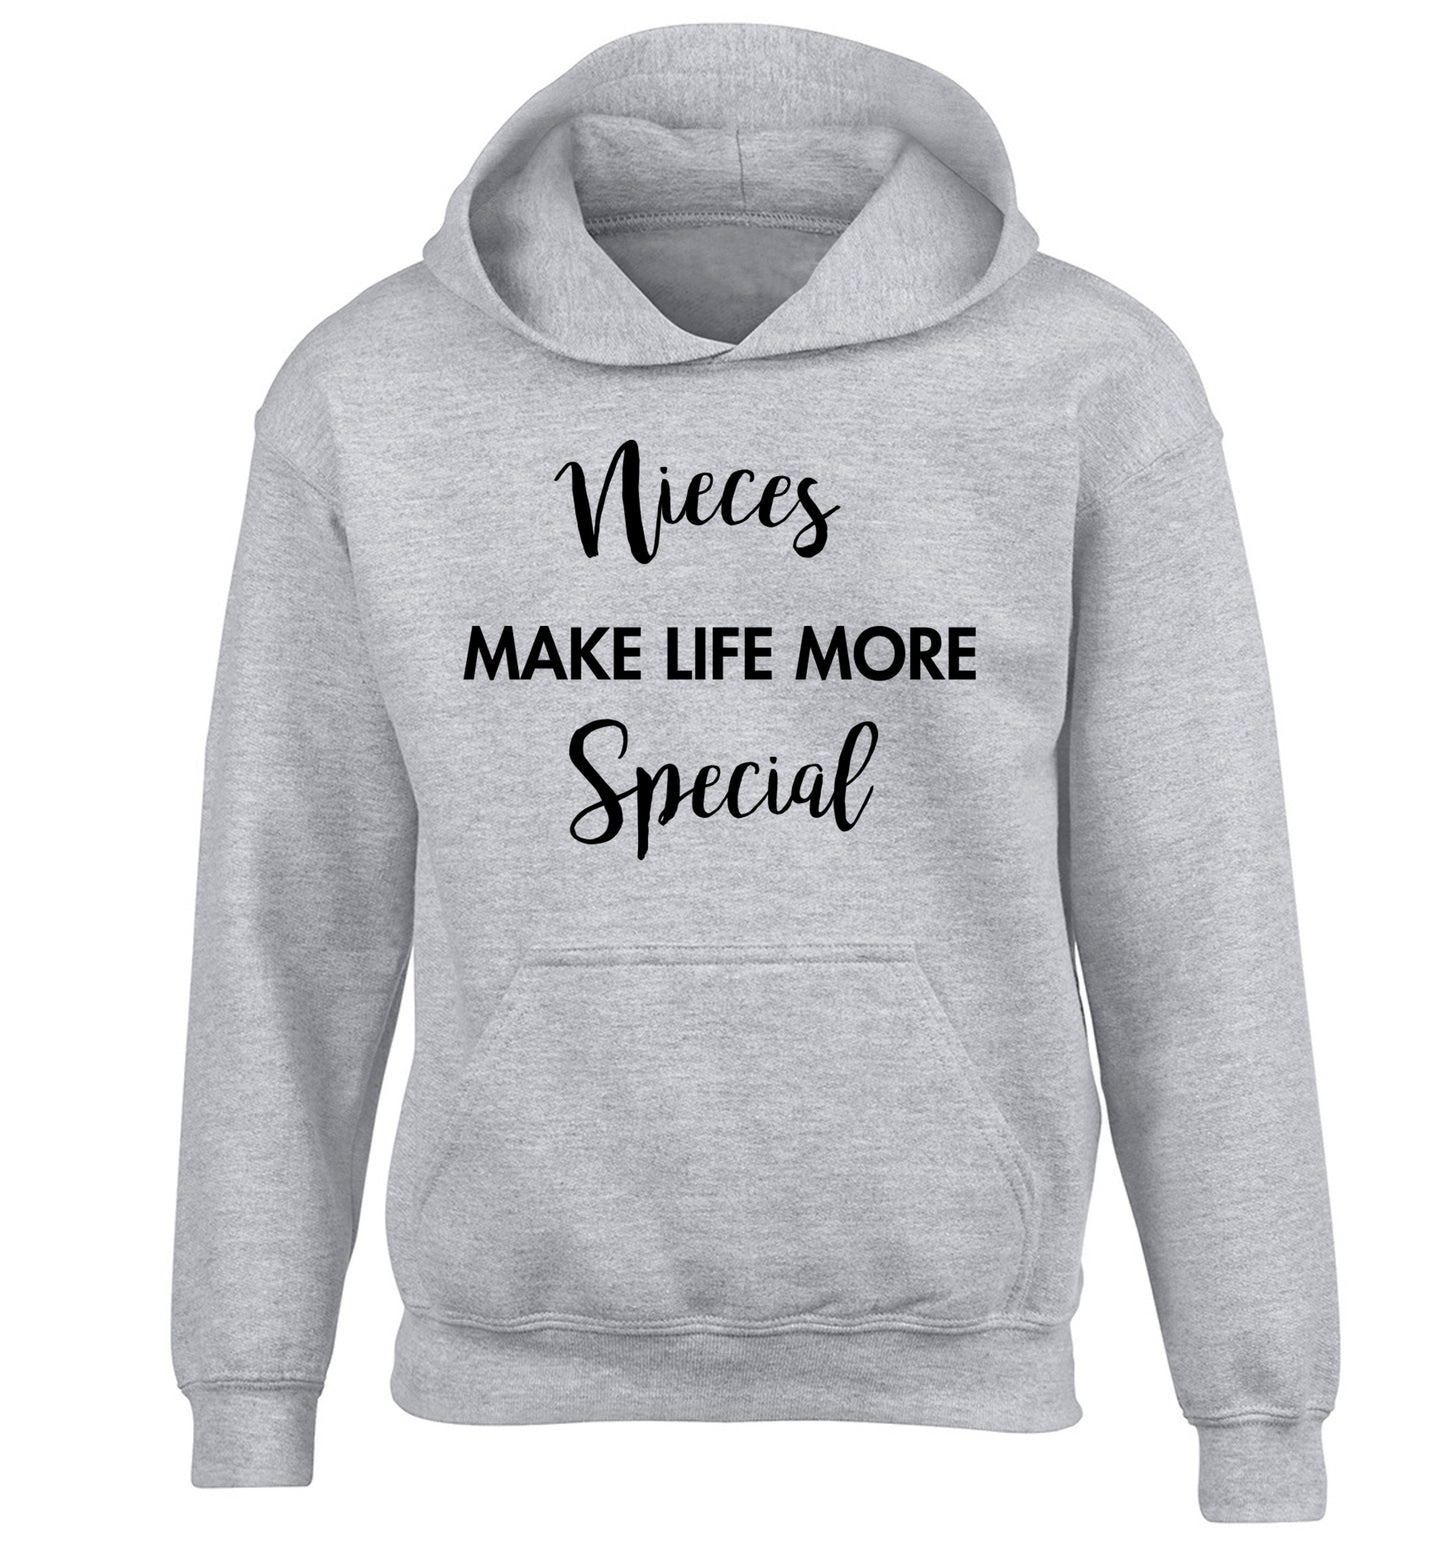 Nieces make life more special children's grey hoodie 12-14 Years